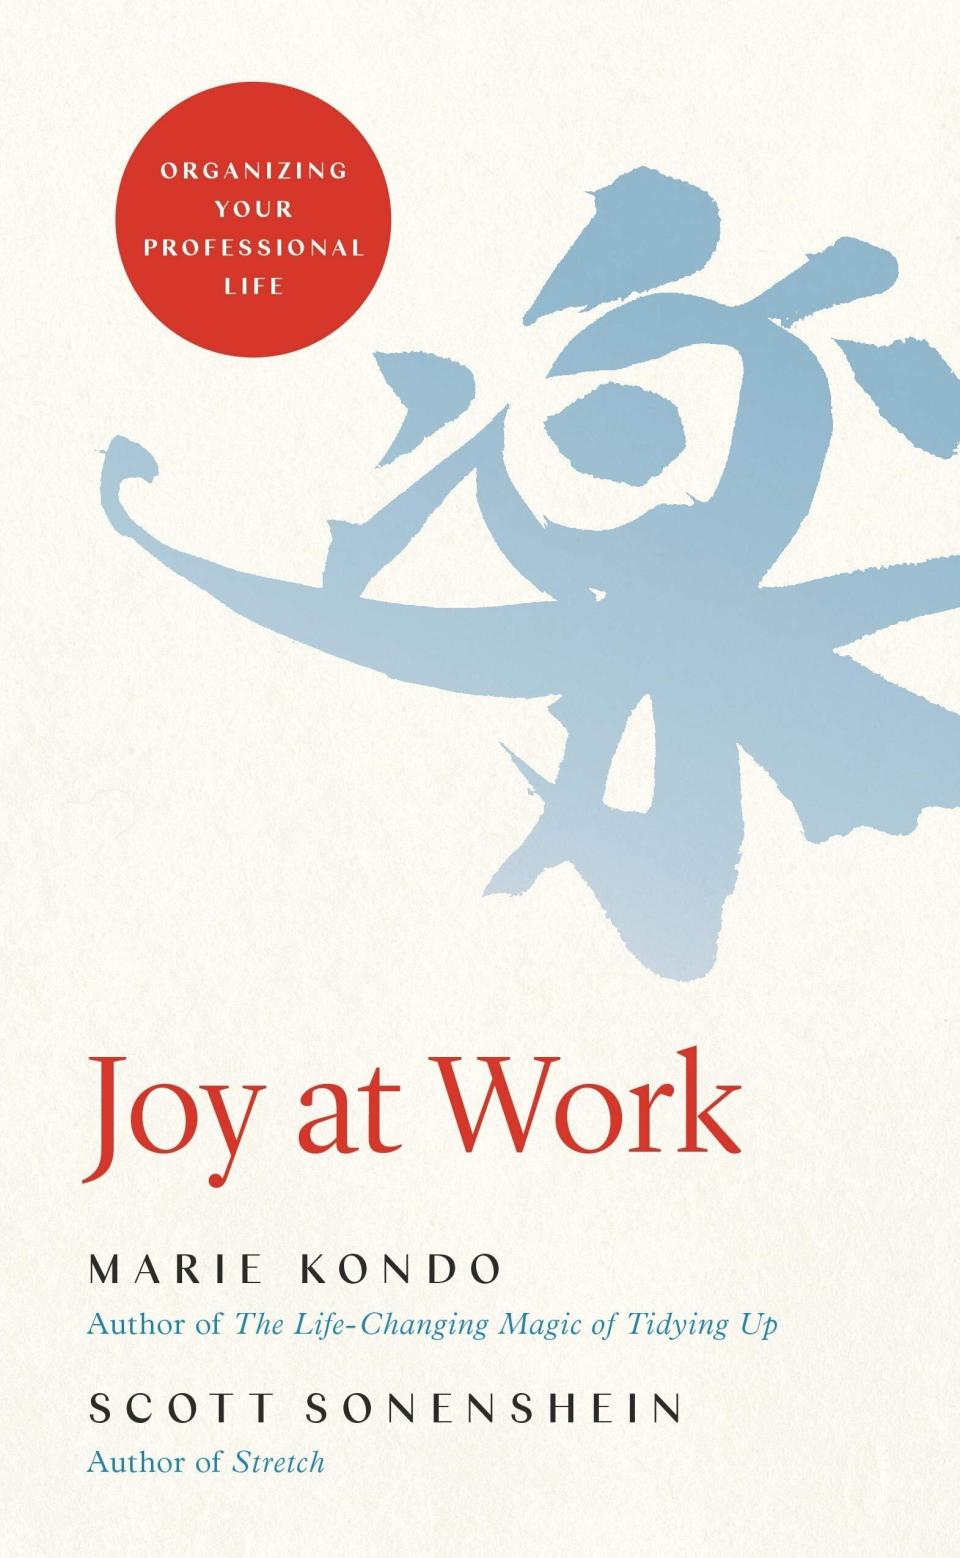 She&rsquo;s back! And this time she&rsquo;s coming to tidy up your work life. Marie Kondo and Scott Sonenshein walk through ways to apply the KonMari Method to your desk, work calendar, emails and more. Find out how a tidy desk can help you find success, joy and productivity in your job. Read more about it on <a href="https://www.goodreads.com/book/show/48119244-joy-at-work" target="_blank" rel="noopener noreferrer">Goodreads</a>, and grab a copy on <a href="https://amzn.to/2JnAGkv" target="_blank" rel="noopener noreferrer">Amazon</a>. <br /><br /><i>Expected release date: </i><i>April 7</i>